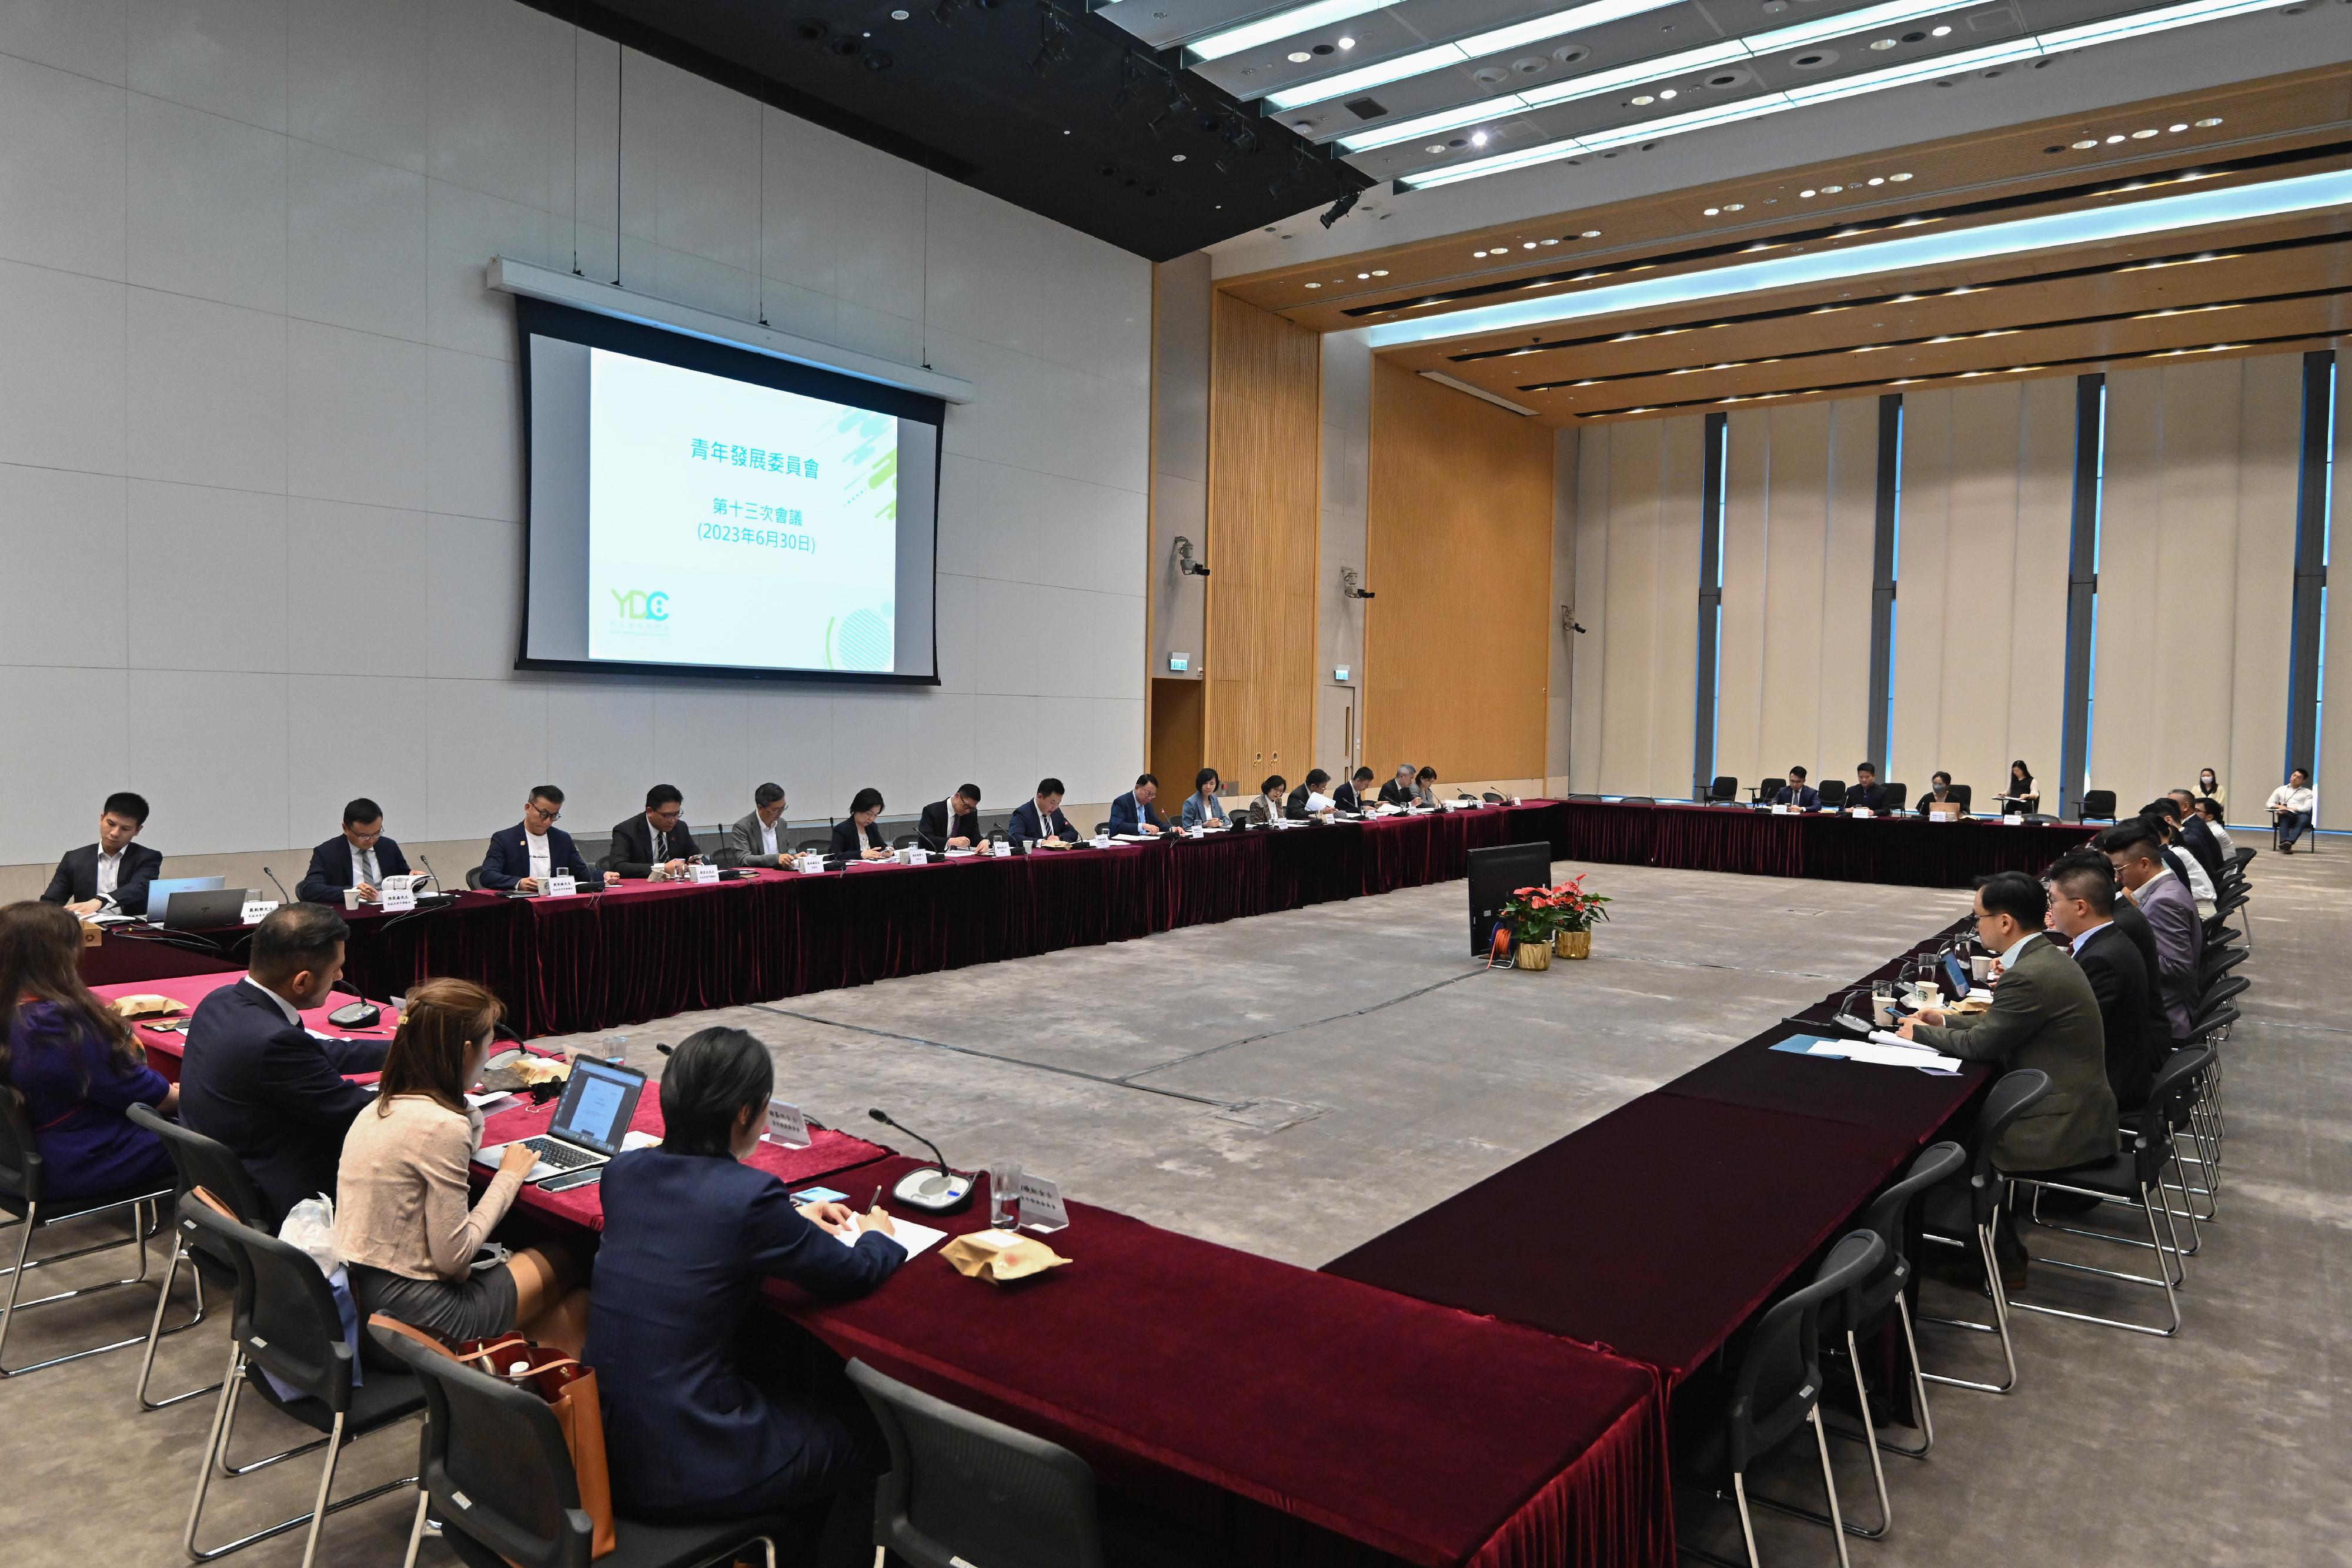 The Chief Secretary for Administration, Mr Chan Kwok-ki, chaired the 13th meeting of the Youth Development Commission at the Central Government Offices today (June 30).
